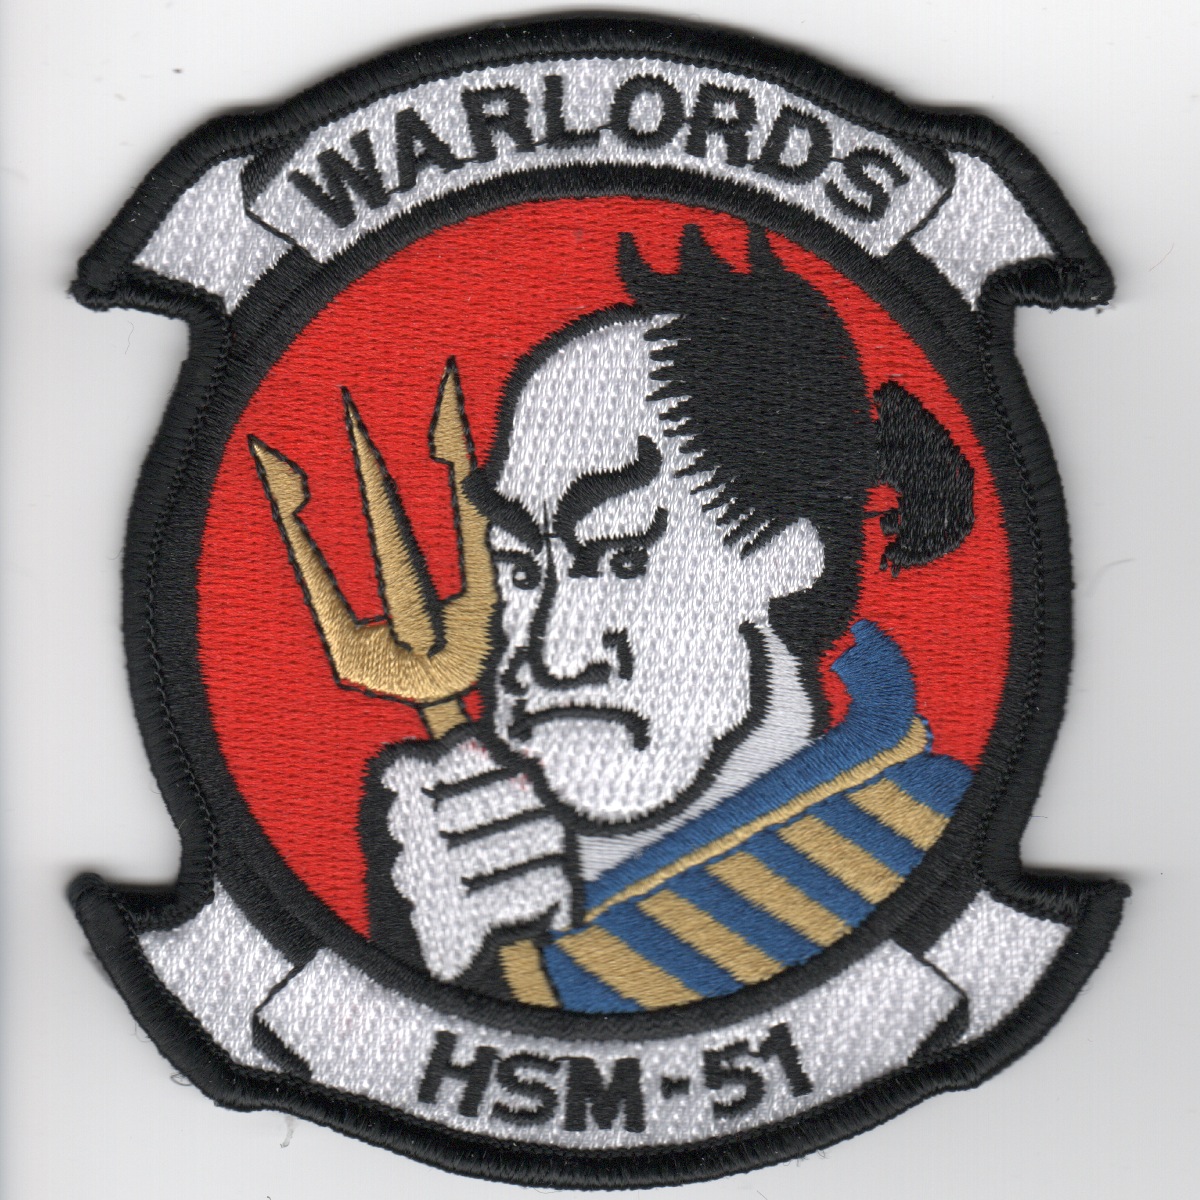 HSM-51 'Warlords' Squadron Patch